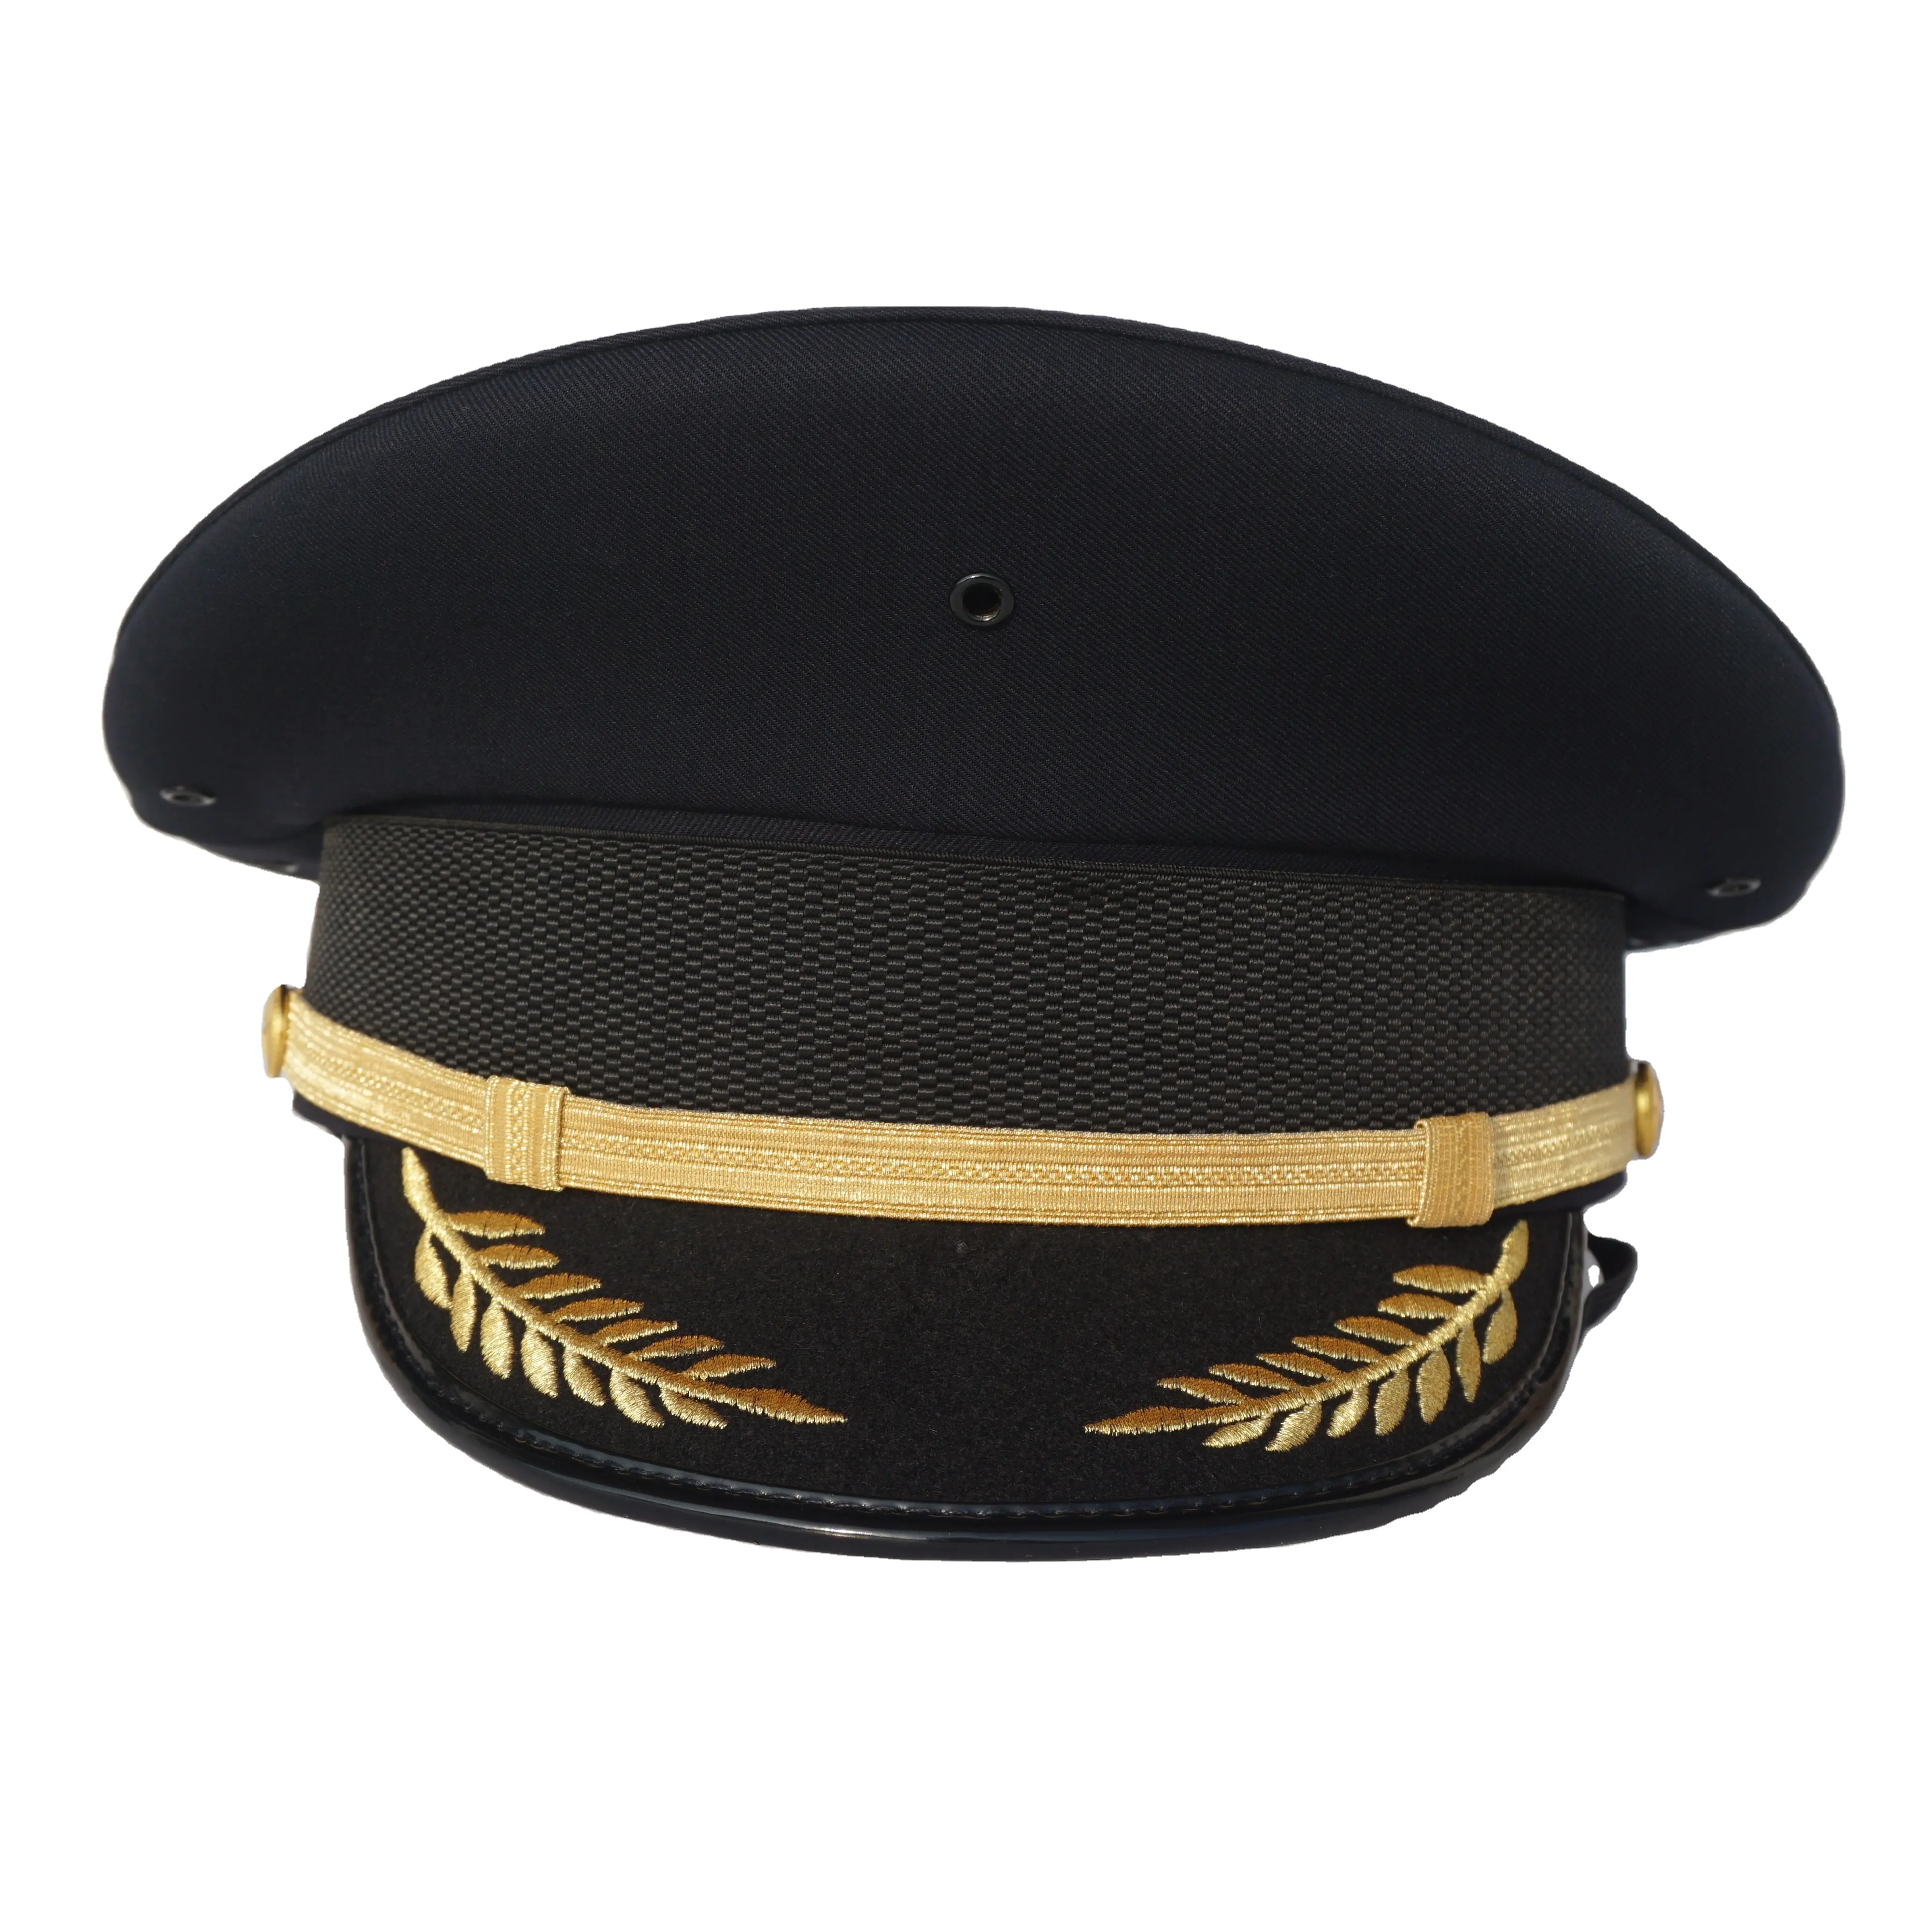 Customized 100% polyester uniform peaked cap brim embroidery airline pilot hat for men